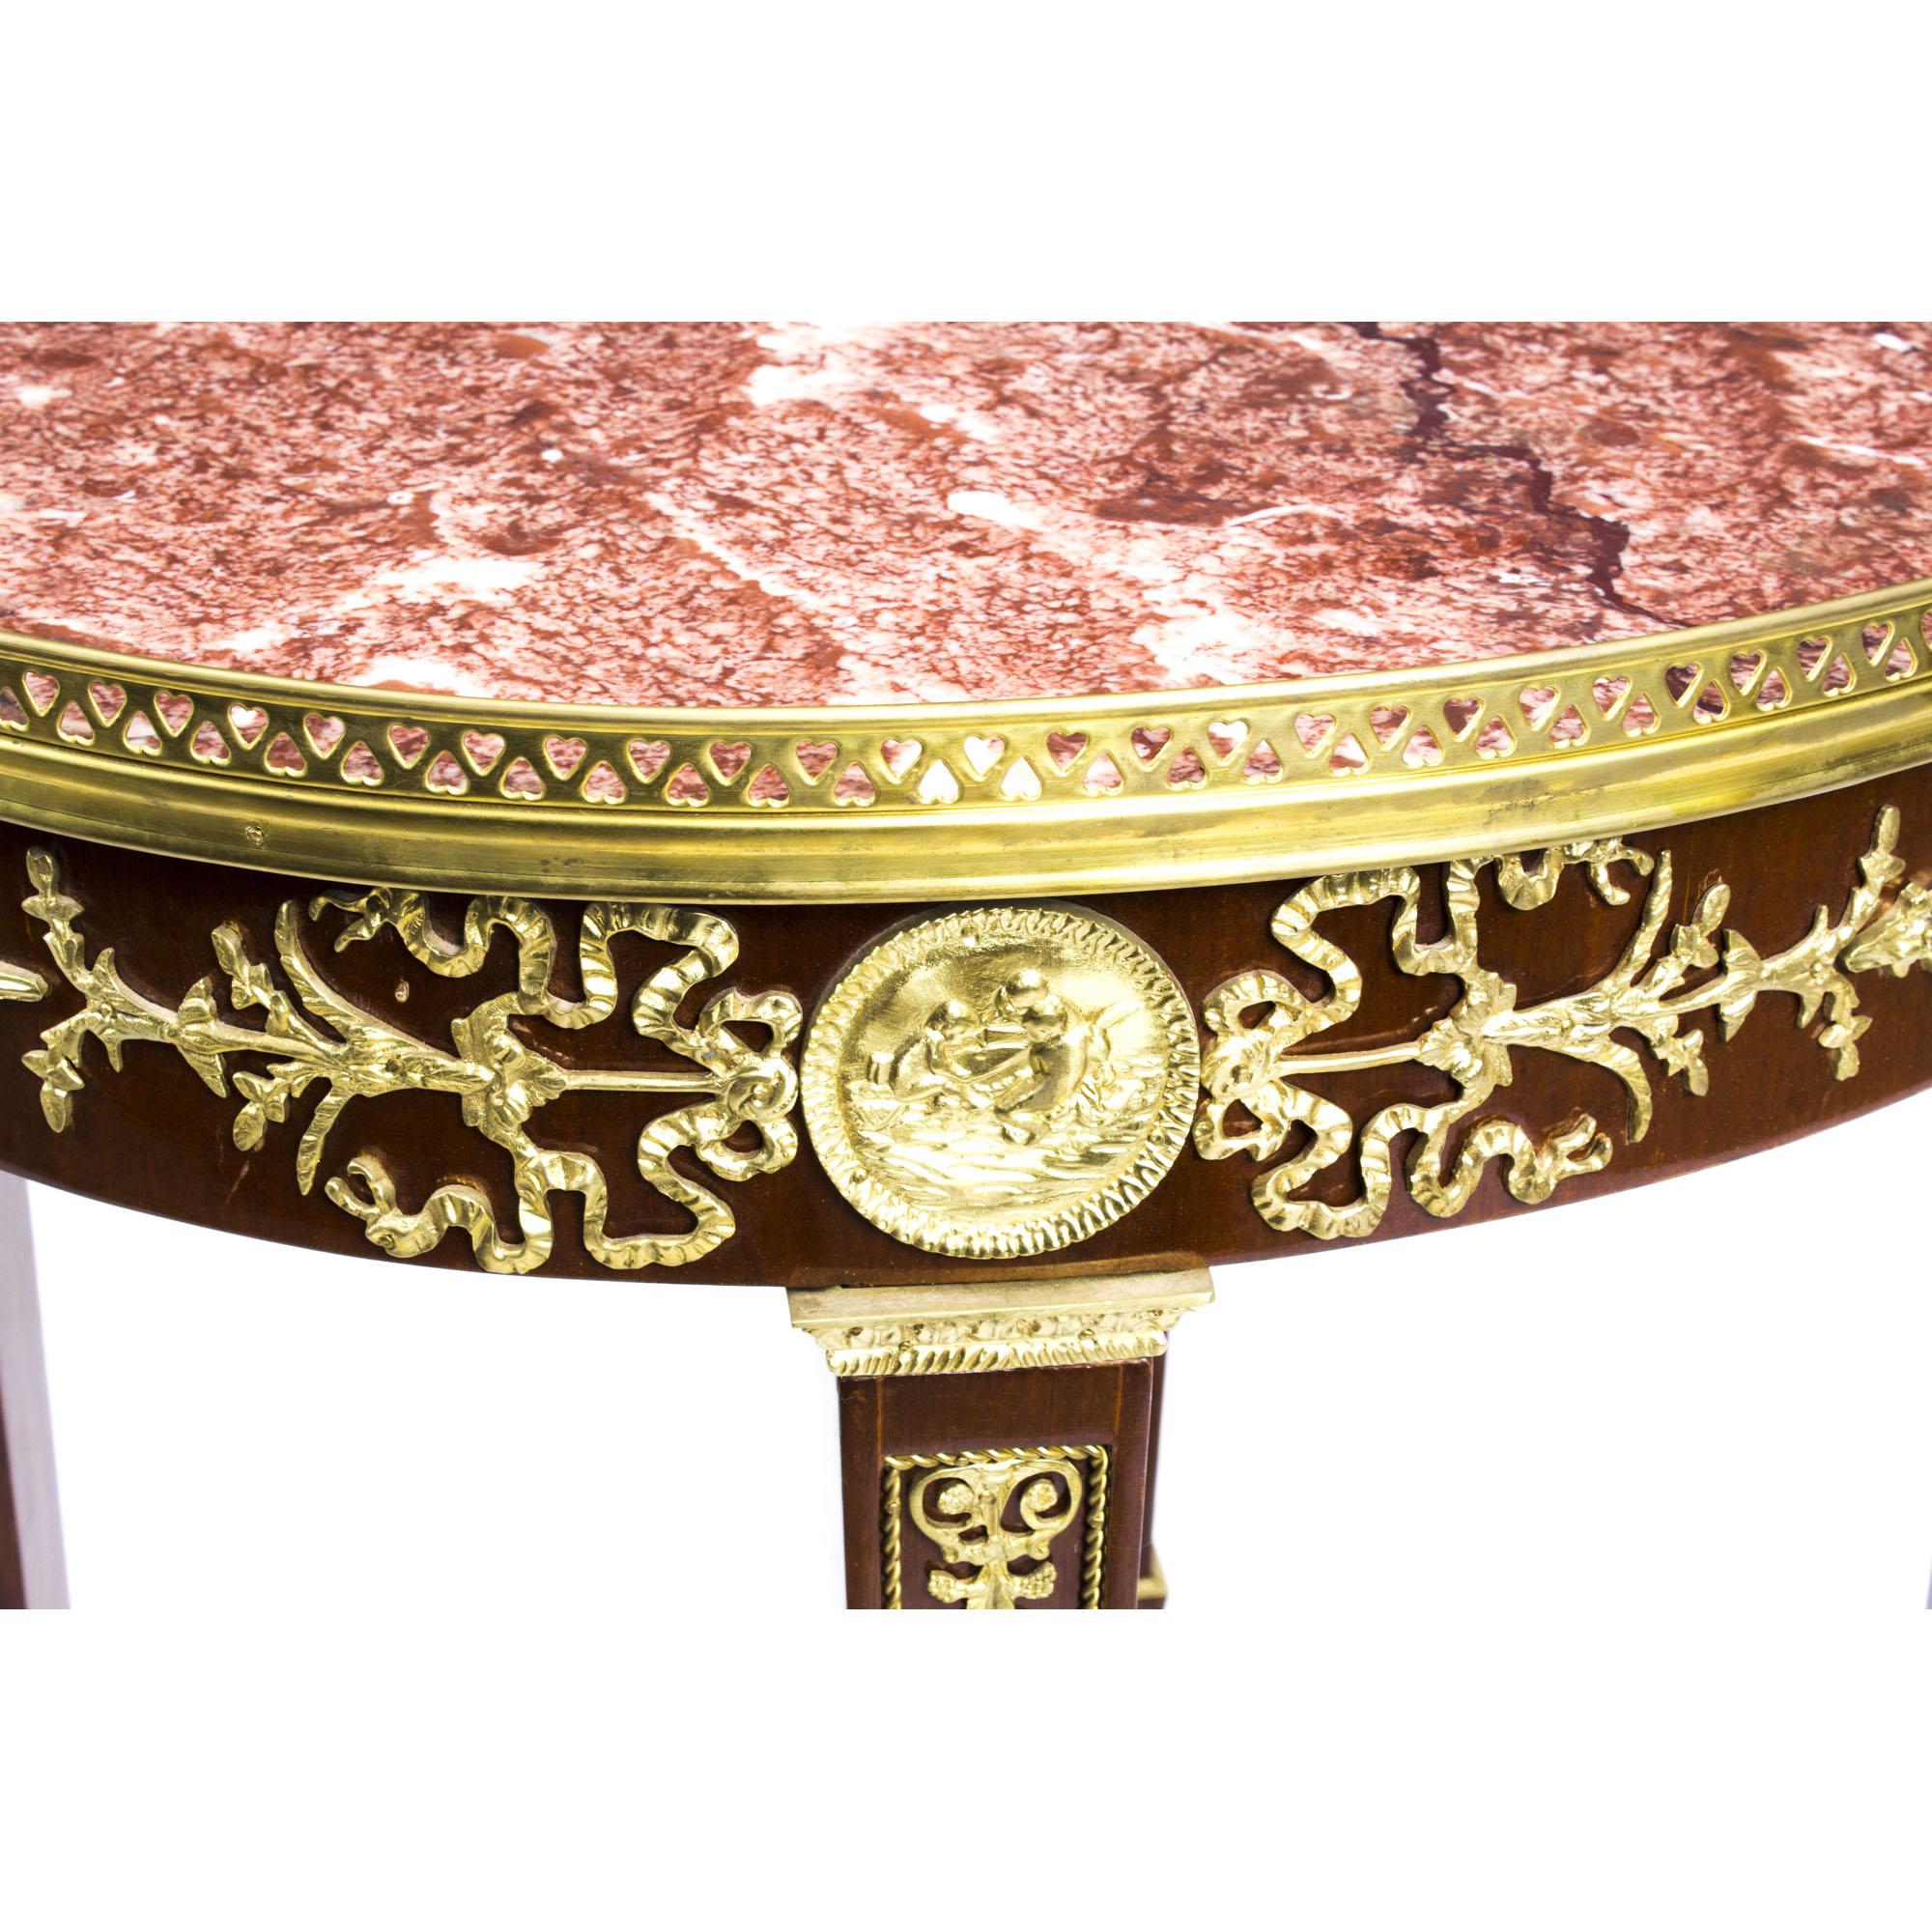 Vintage Empire Revival Marble Top Ormolu Mounted Occasional Table 20th C For Sale 3